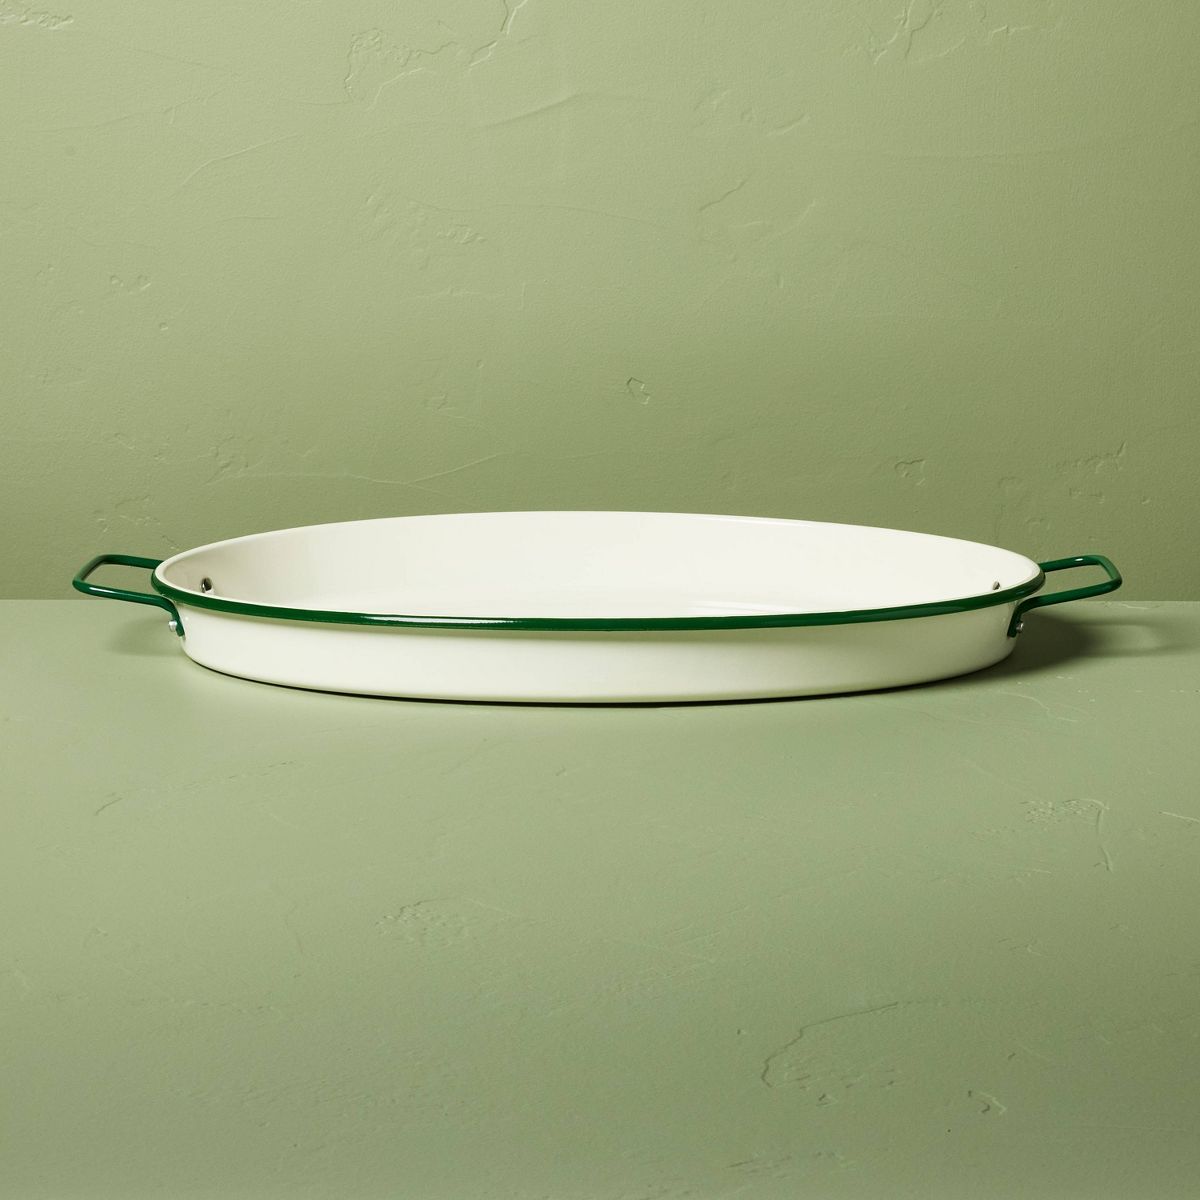 Enamel-Coated Metal Oval Serving Tray Cream/Green - Hearth & Hand™ with Magnolia | Target